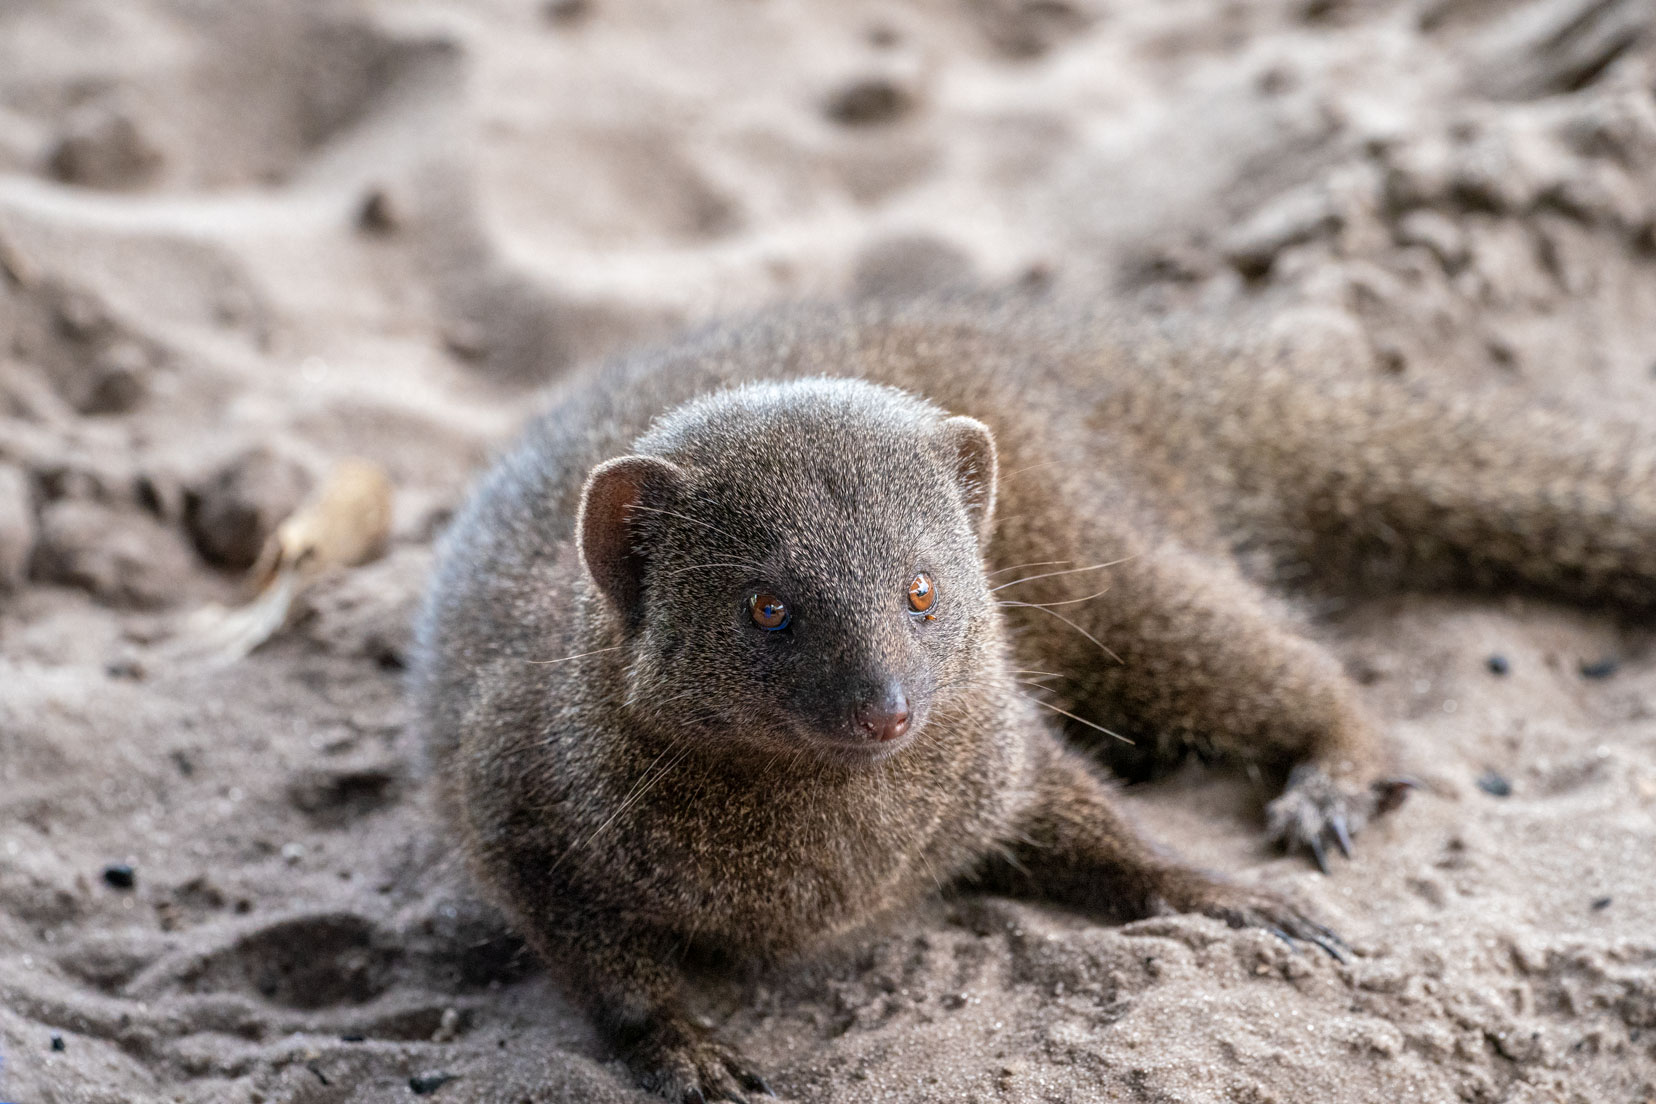 Dwarf mongoose lying in the sand